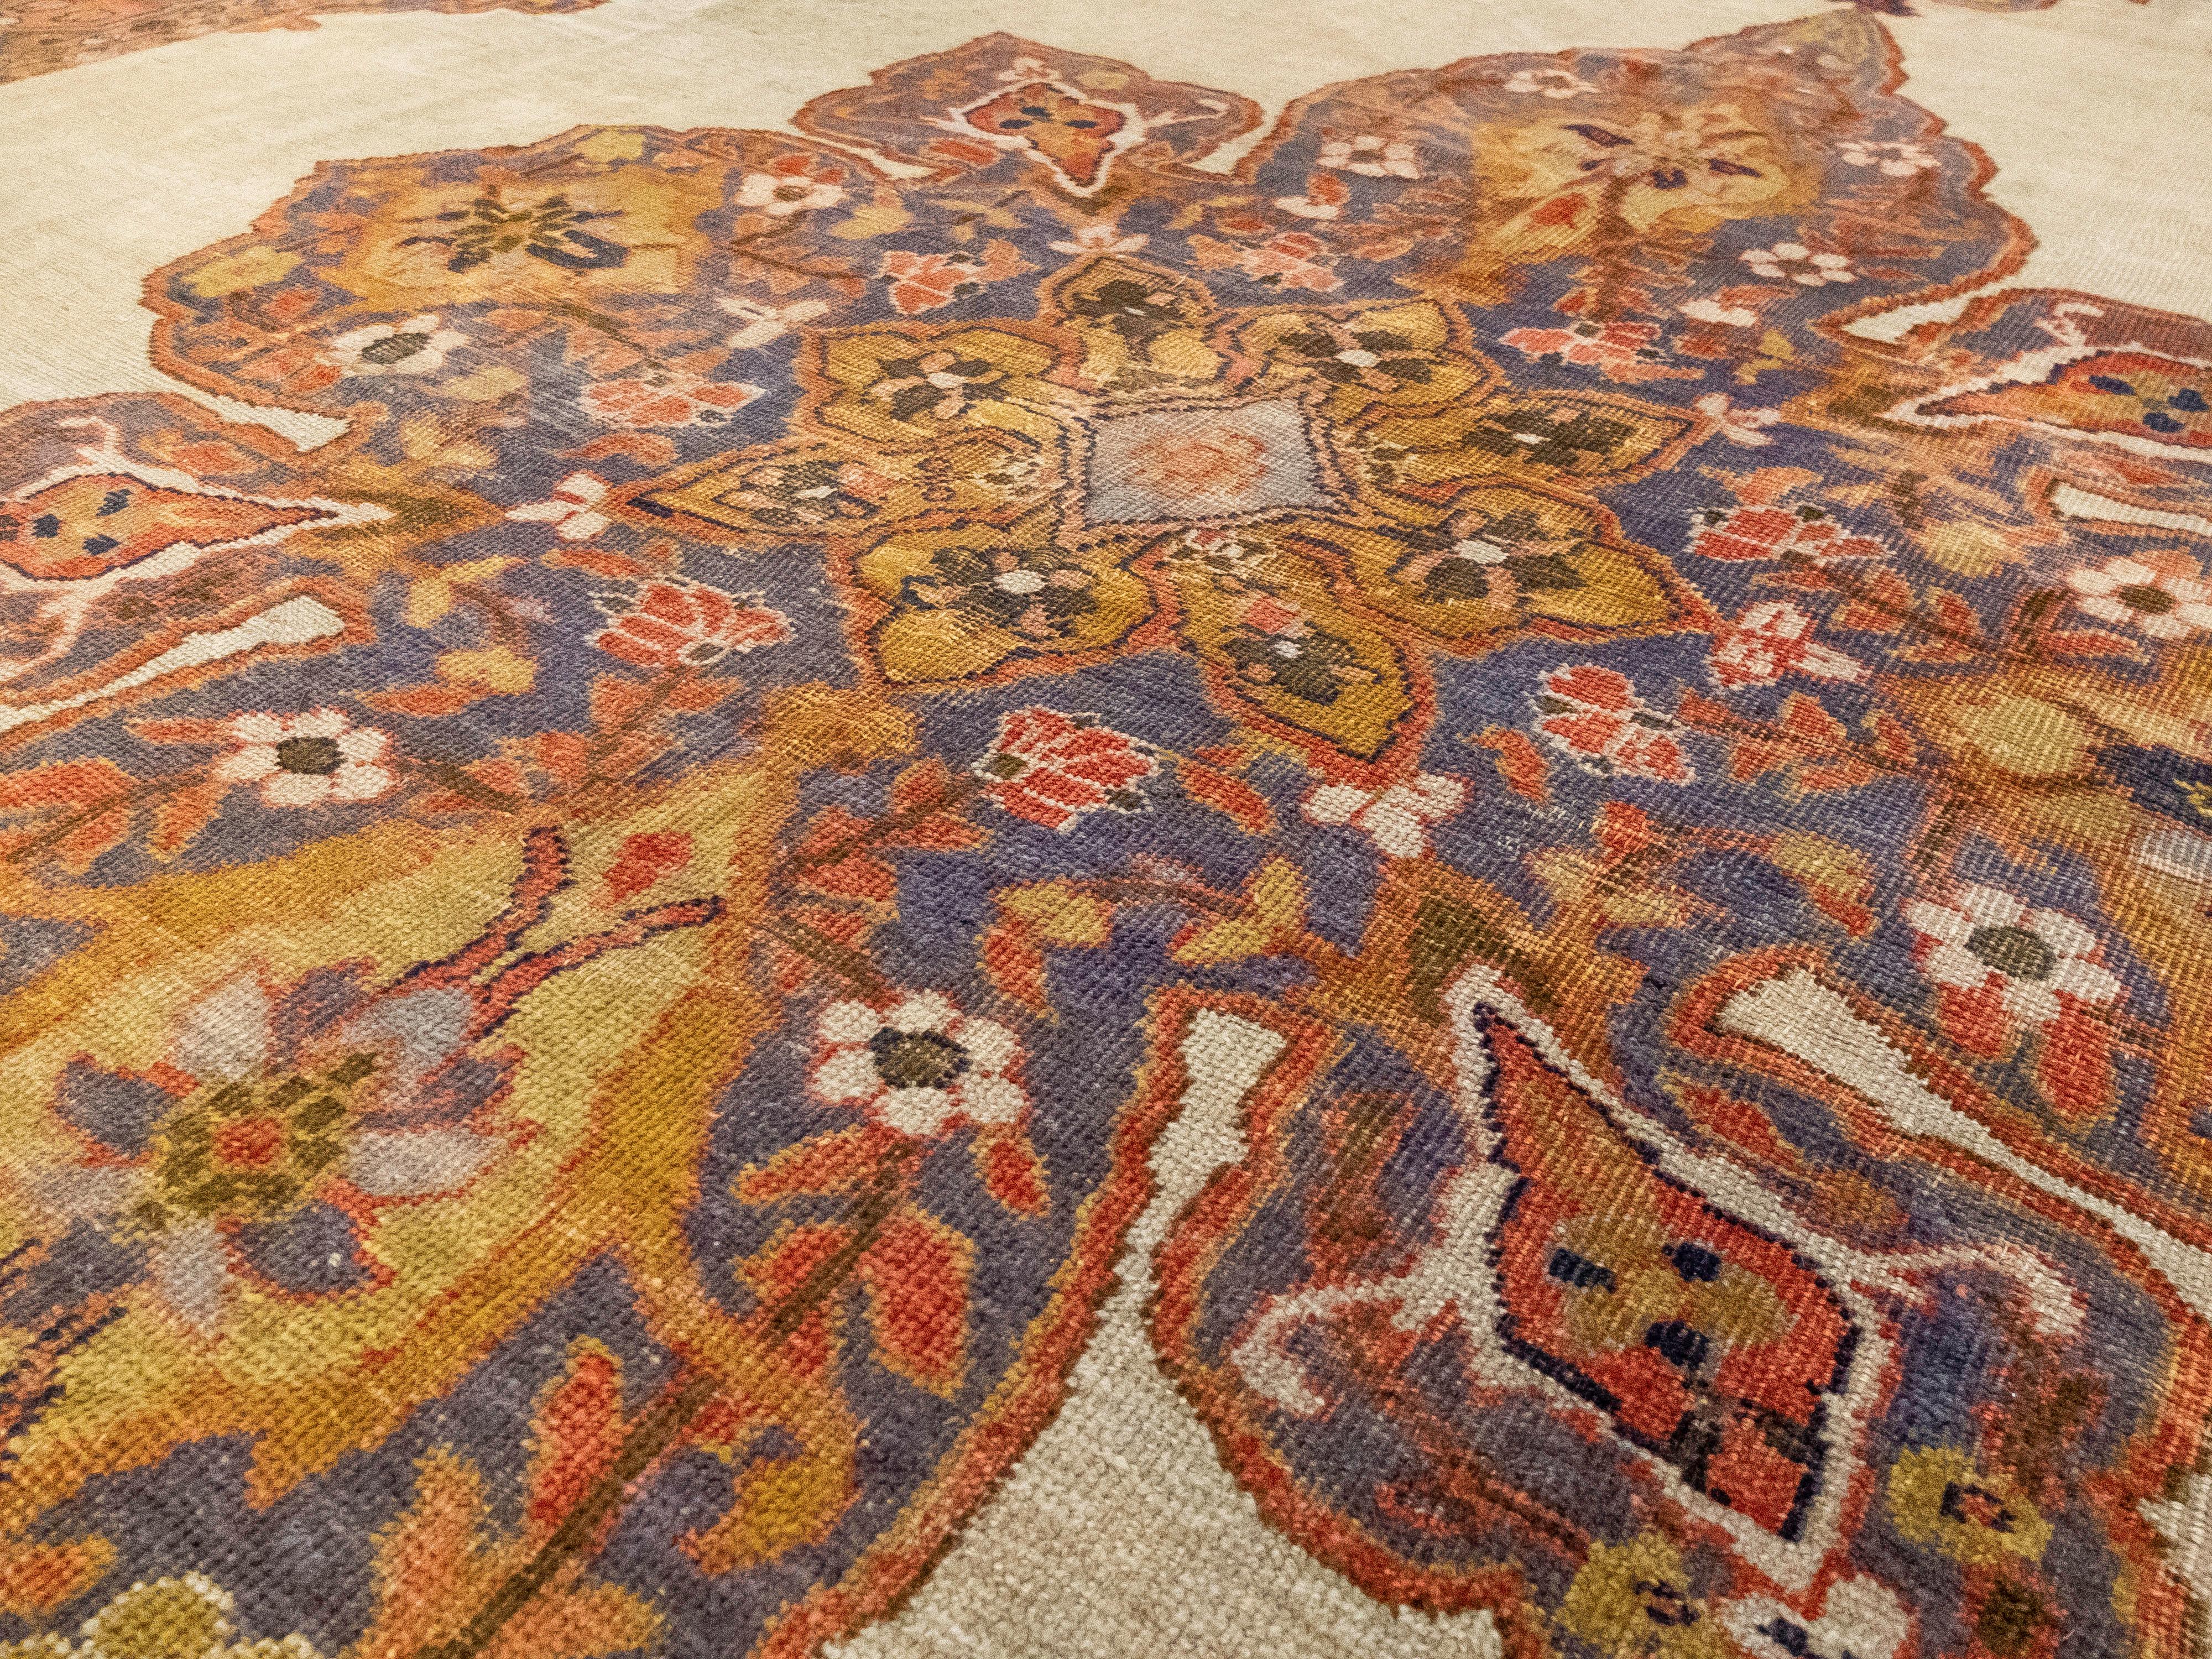 This is a uniquely patterned antique Ziegler Mahal rug. The pile is made with hand-spun wool and it has a cotton foundation. It has the Ziegler Mahal traditional feature of a large ornate floral center and is surrounded by several individually